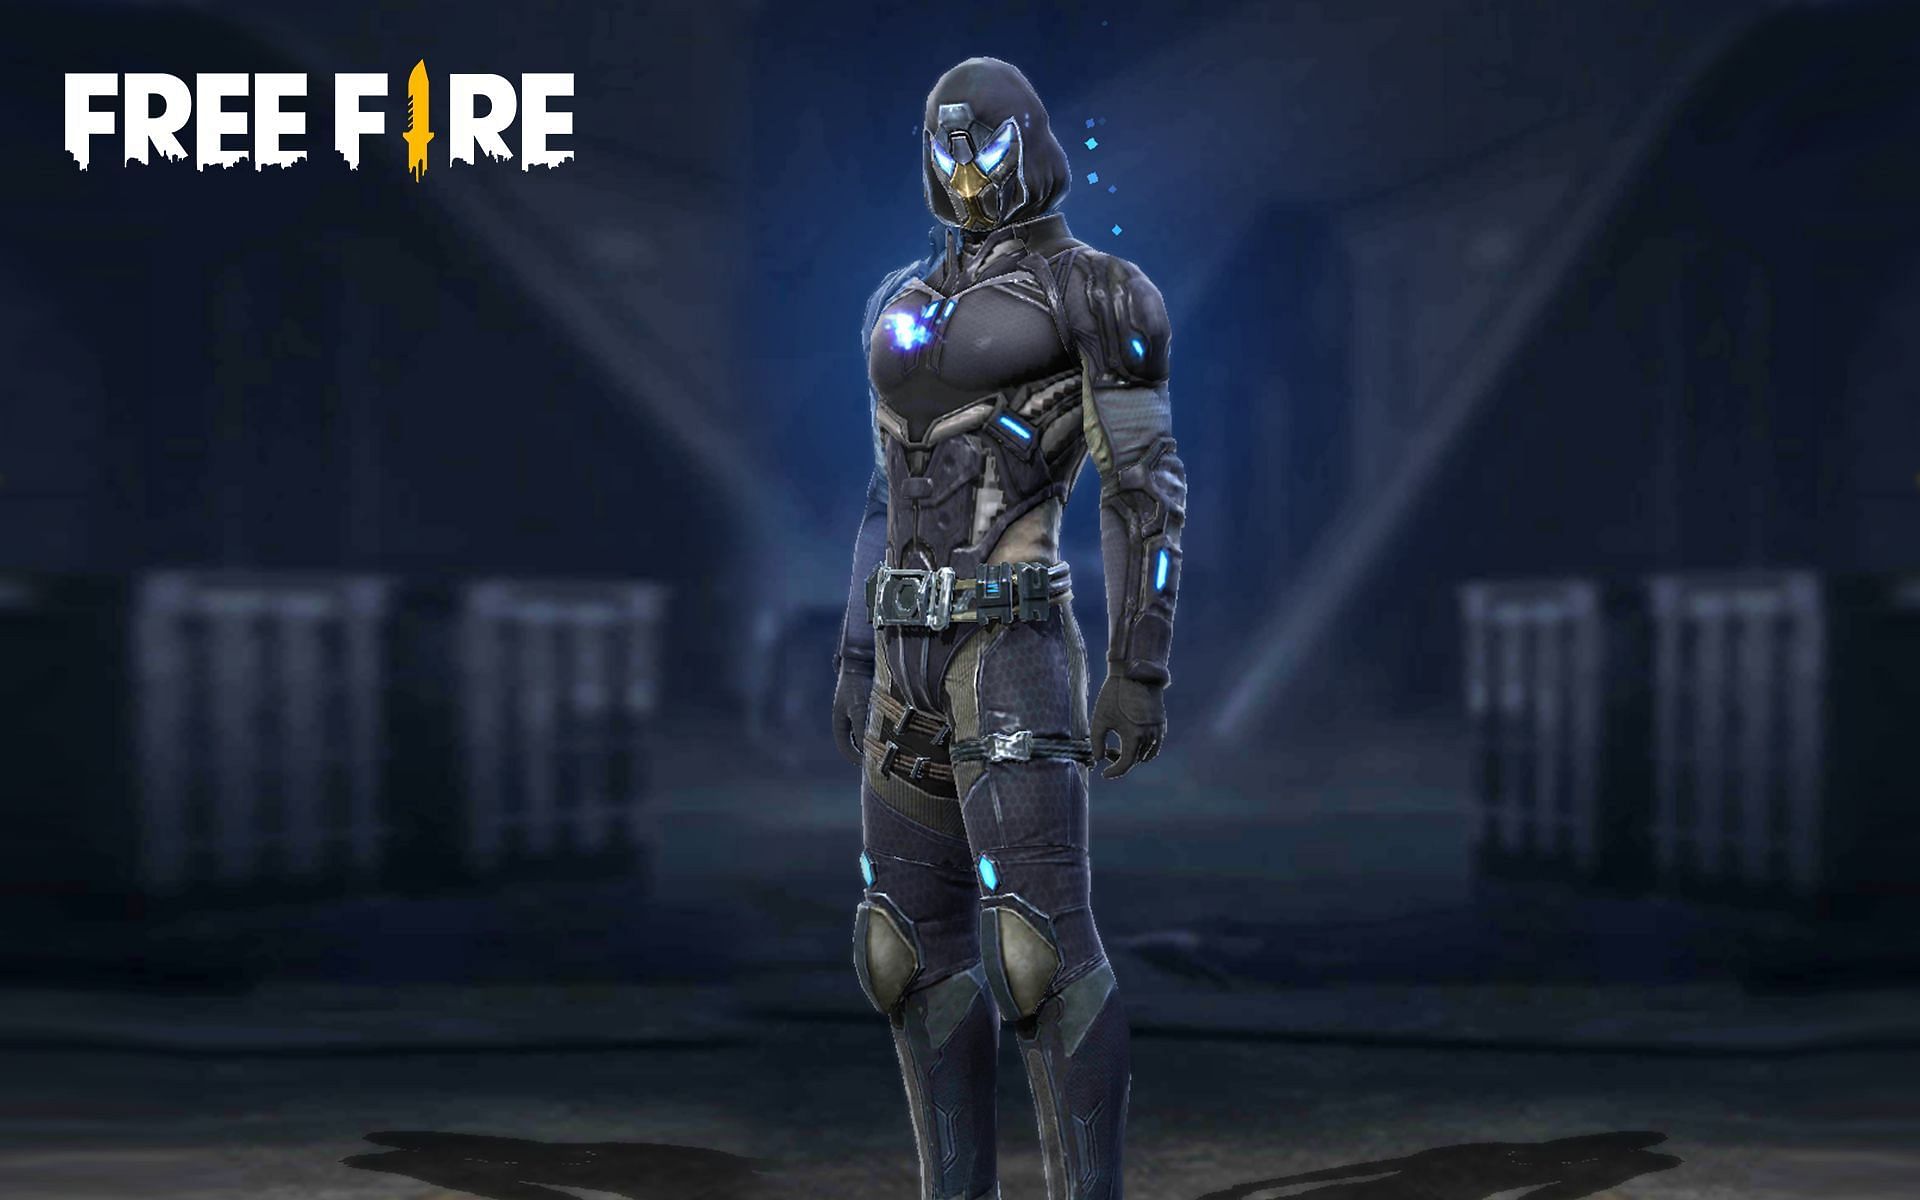 A Magic Cube will be given out to everyone in Free Fire (Image via Free Fire)